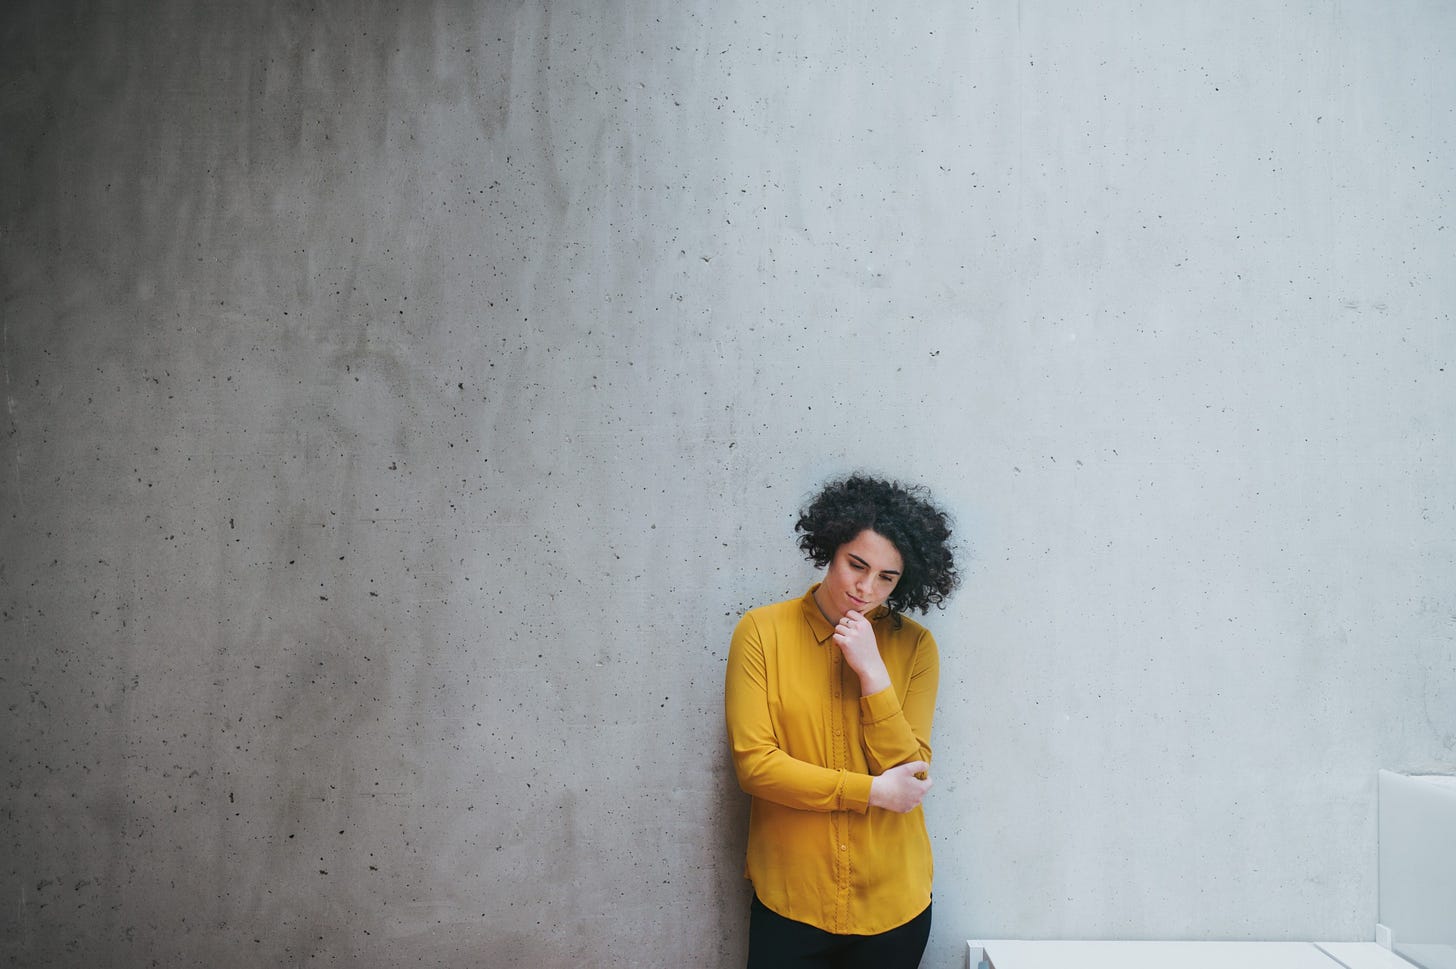 A woman wit curly hair and a yellow shirt stands against a bare concrete background pensively.